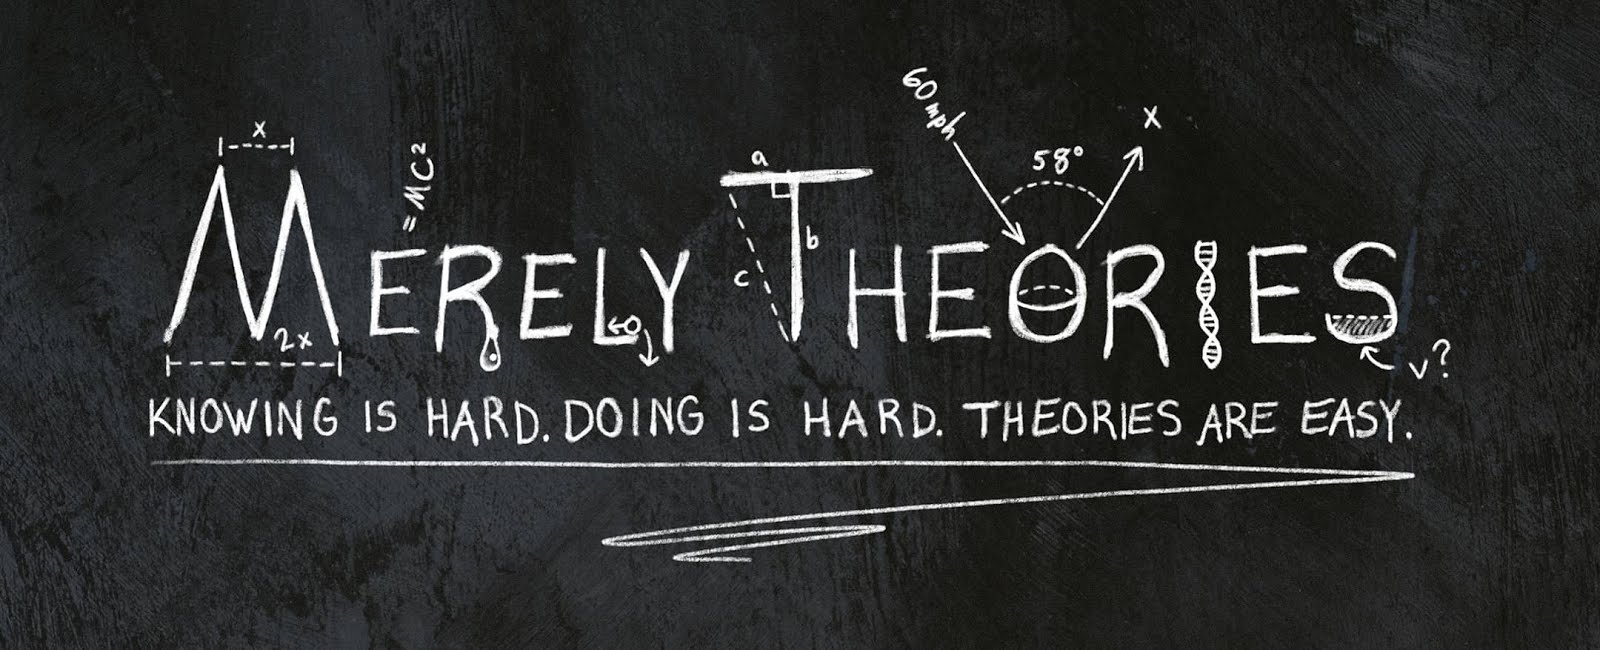 Merely Theories